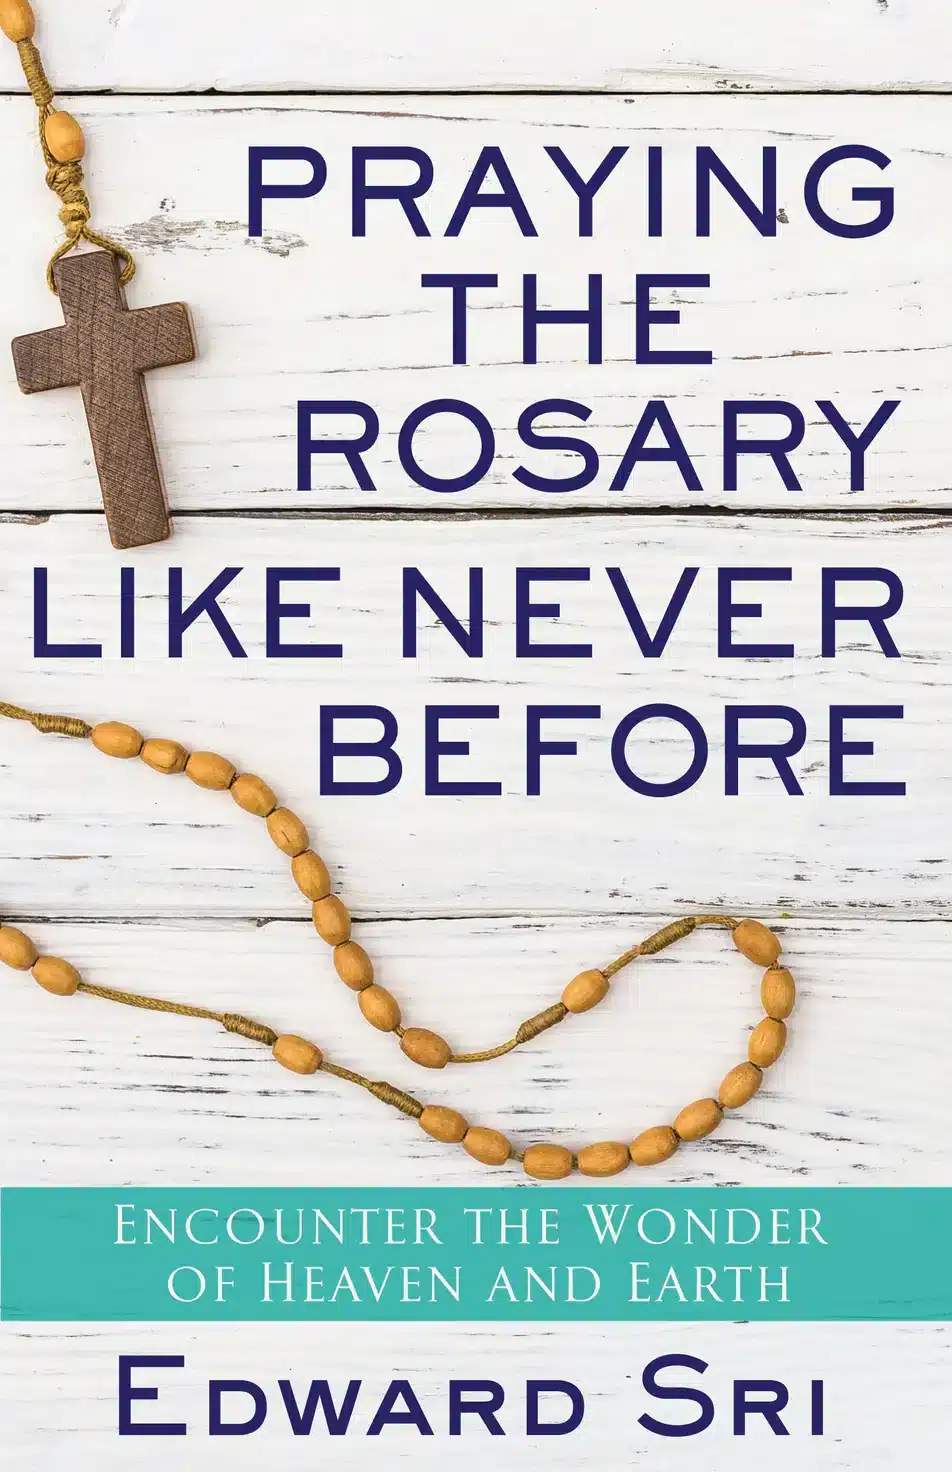 Book cover of ‘Praying the Rosary Like Never Before‘ by Edward Sri